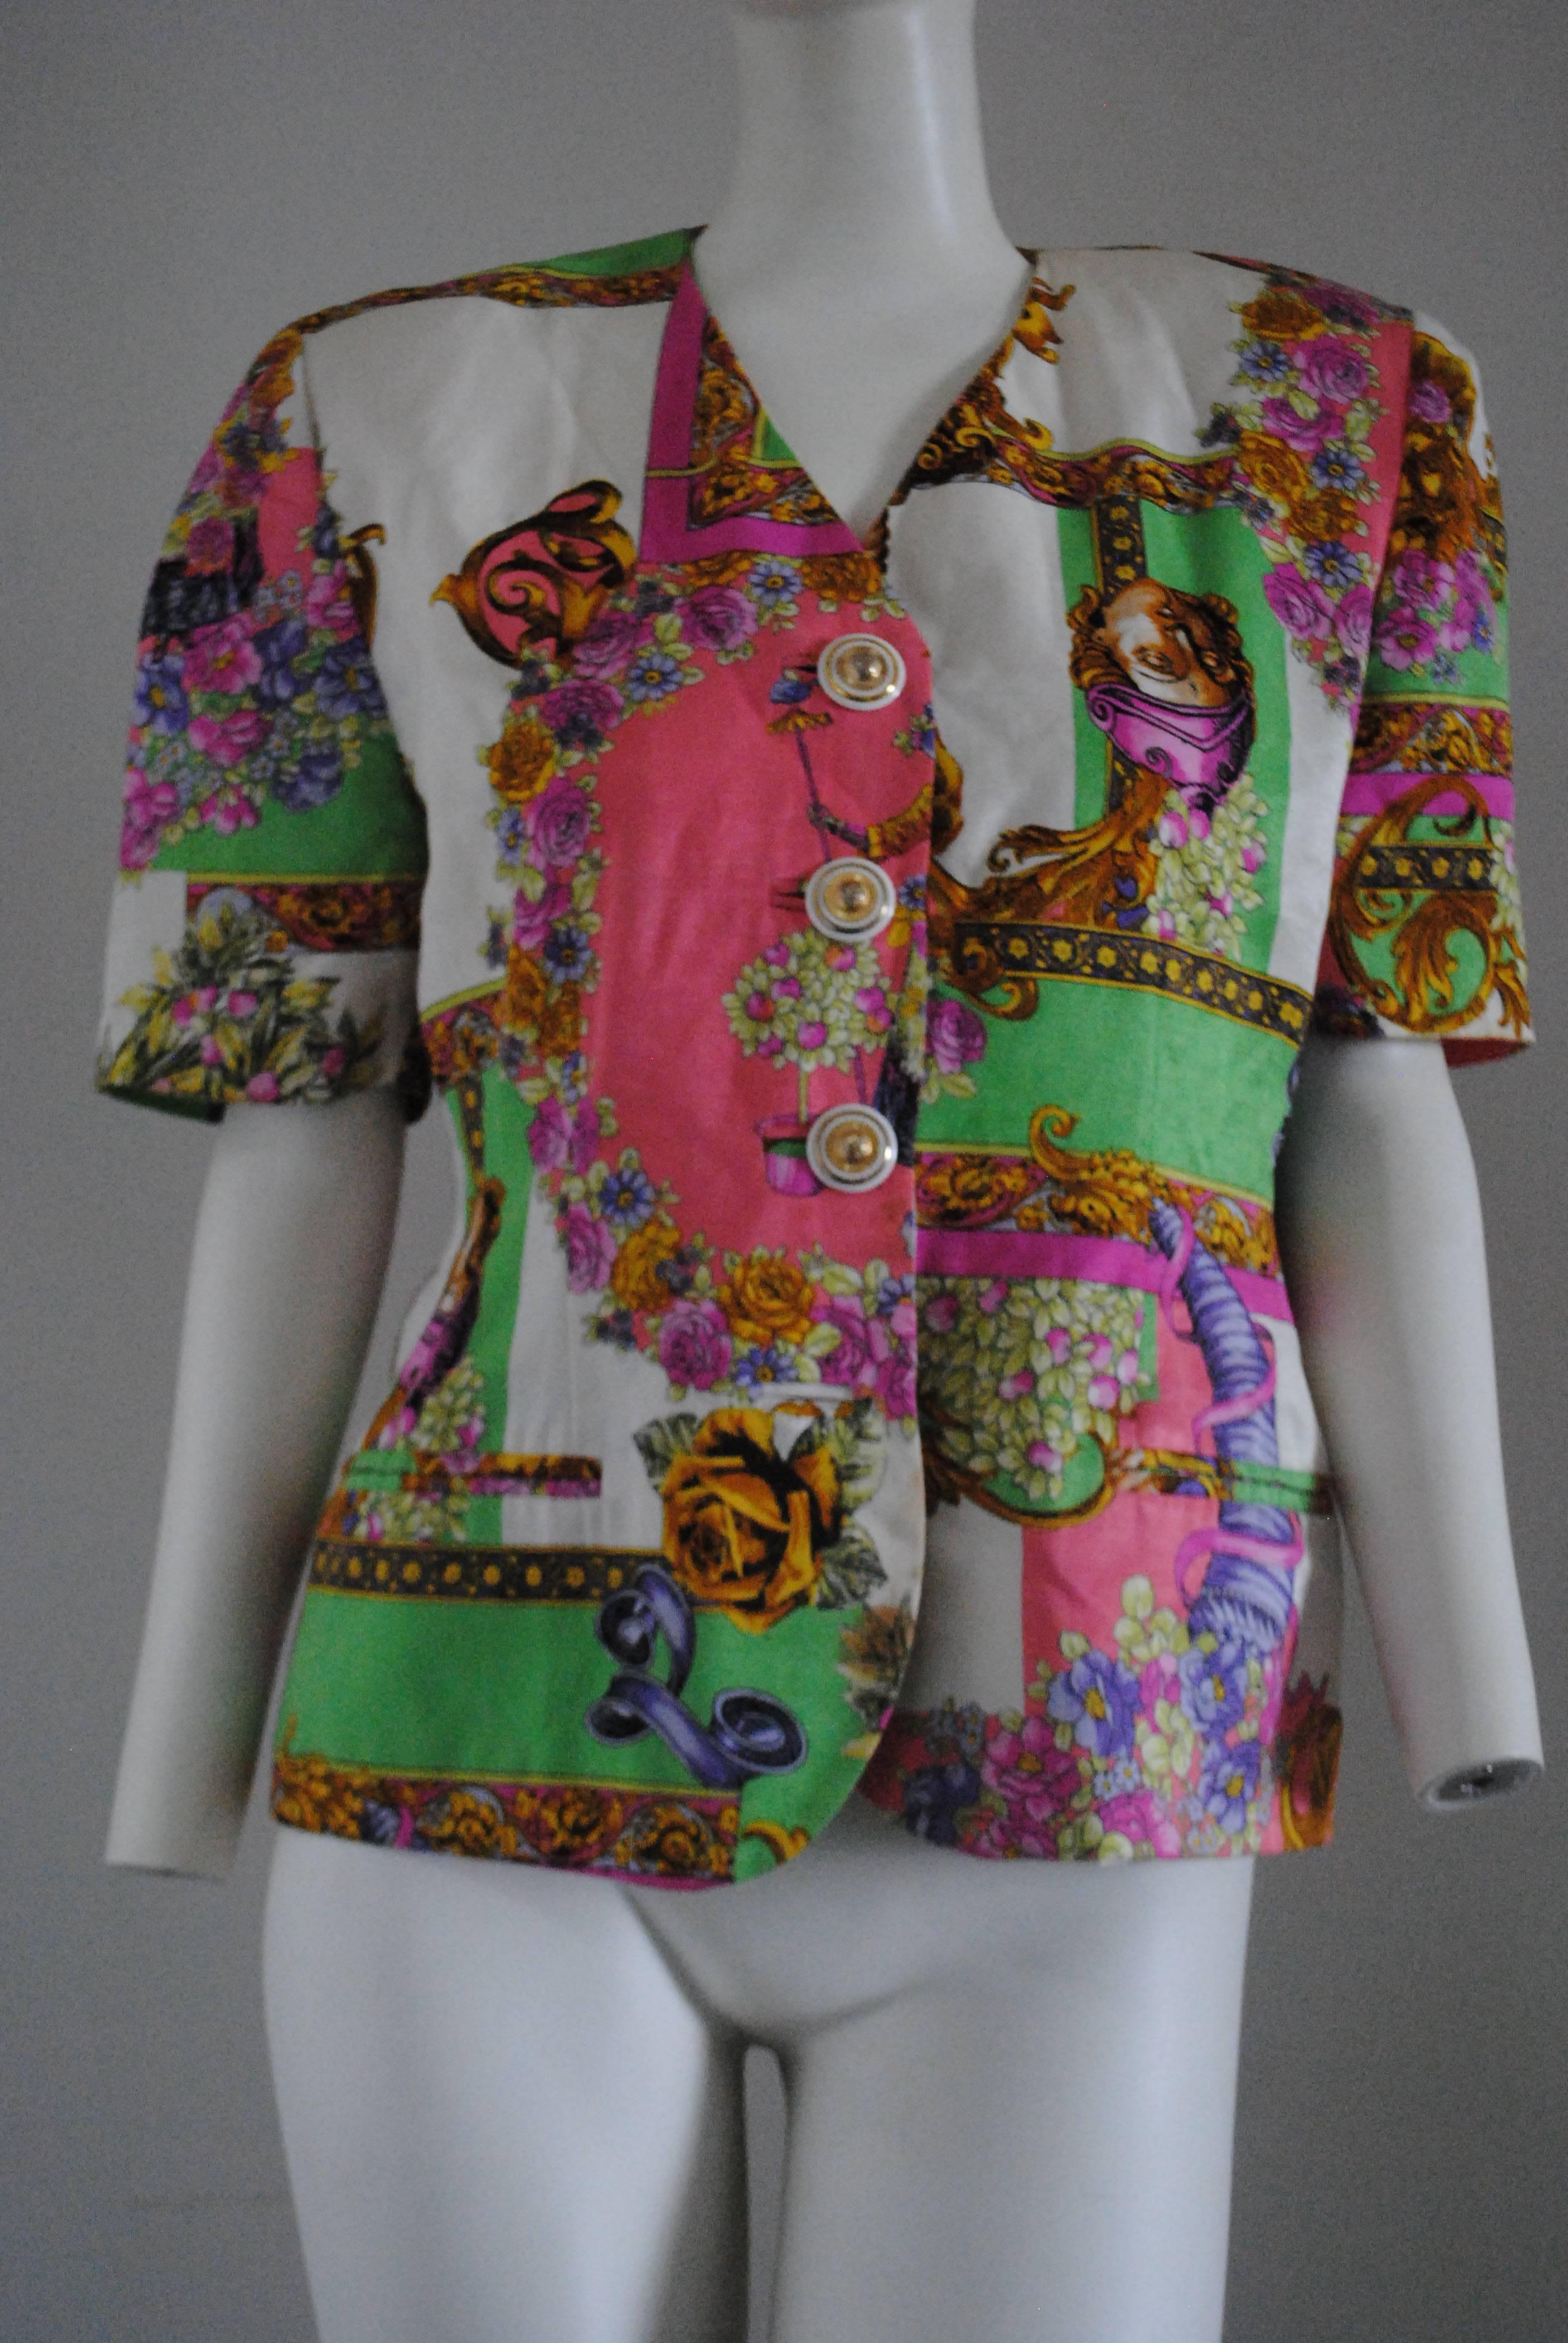 1980s Swish Multicolour Cotton Jacket

4 jewels white gold tone bottons 

Totally made in italy in italian size range 42

Composition: Nylon and cotton

Check pics as on the down there is a small stain